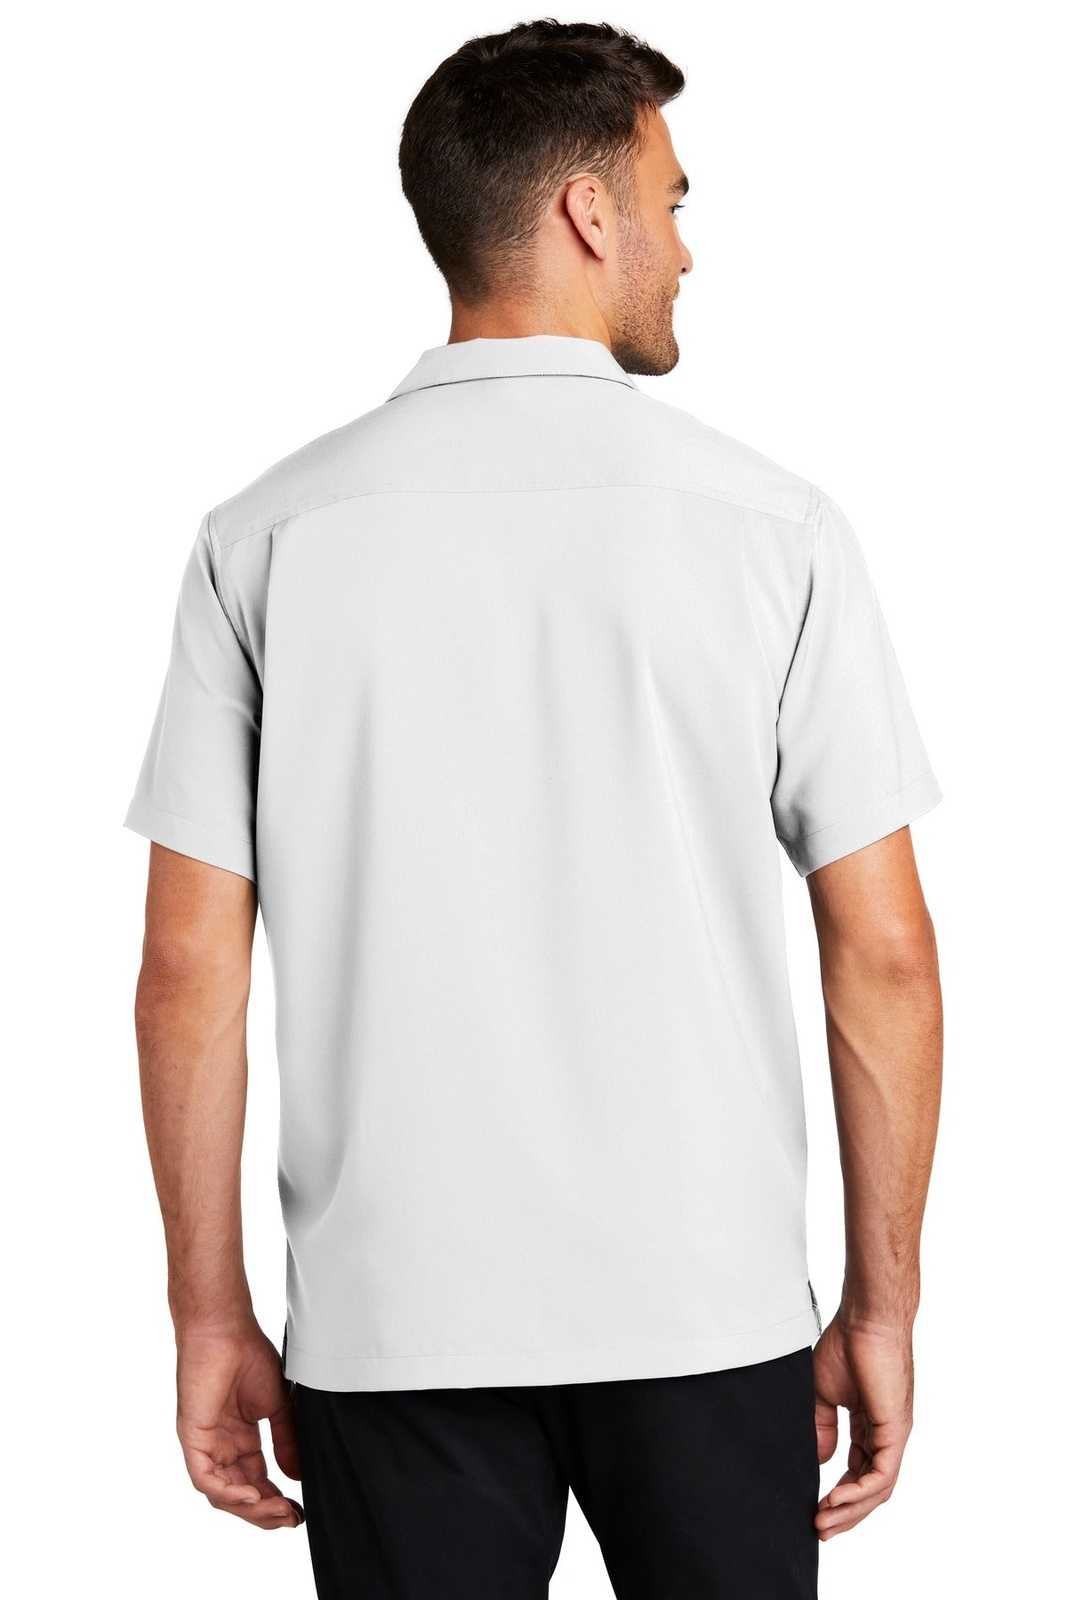 Port Authority W400 Short Sleeve Performance Staff Shirt - White - HIT a Double - 2